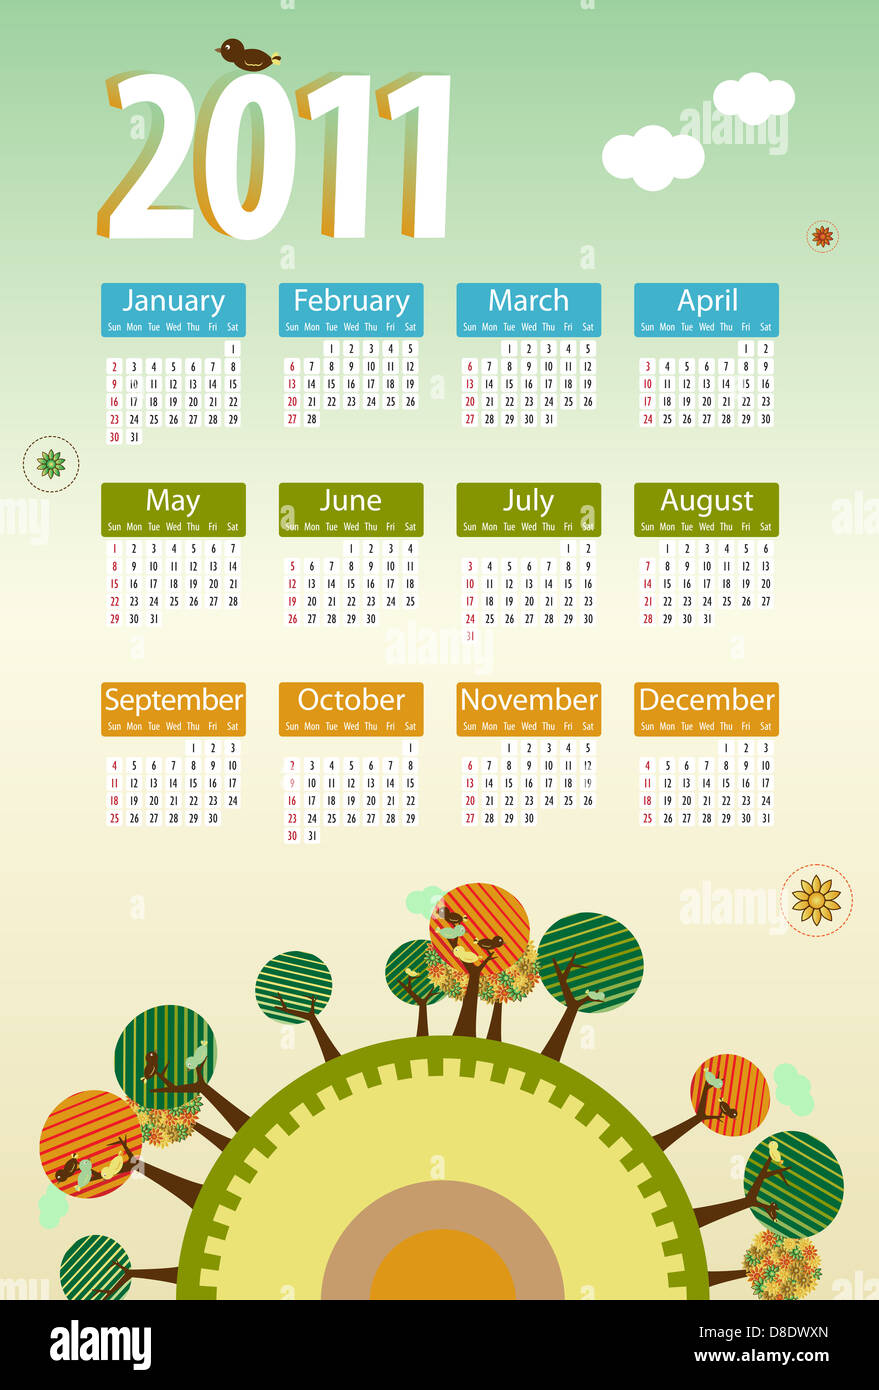 Calendar 2011 environmental retro planet with trees,birds,flowers and clouds. Editable Vector Illustration Stock Photo